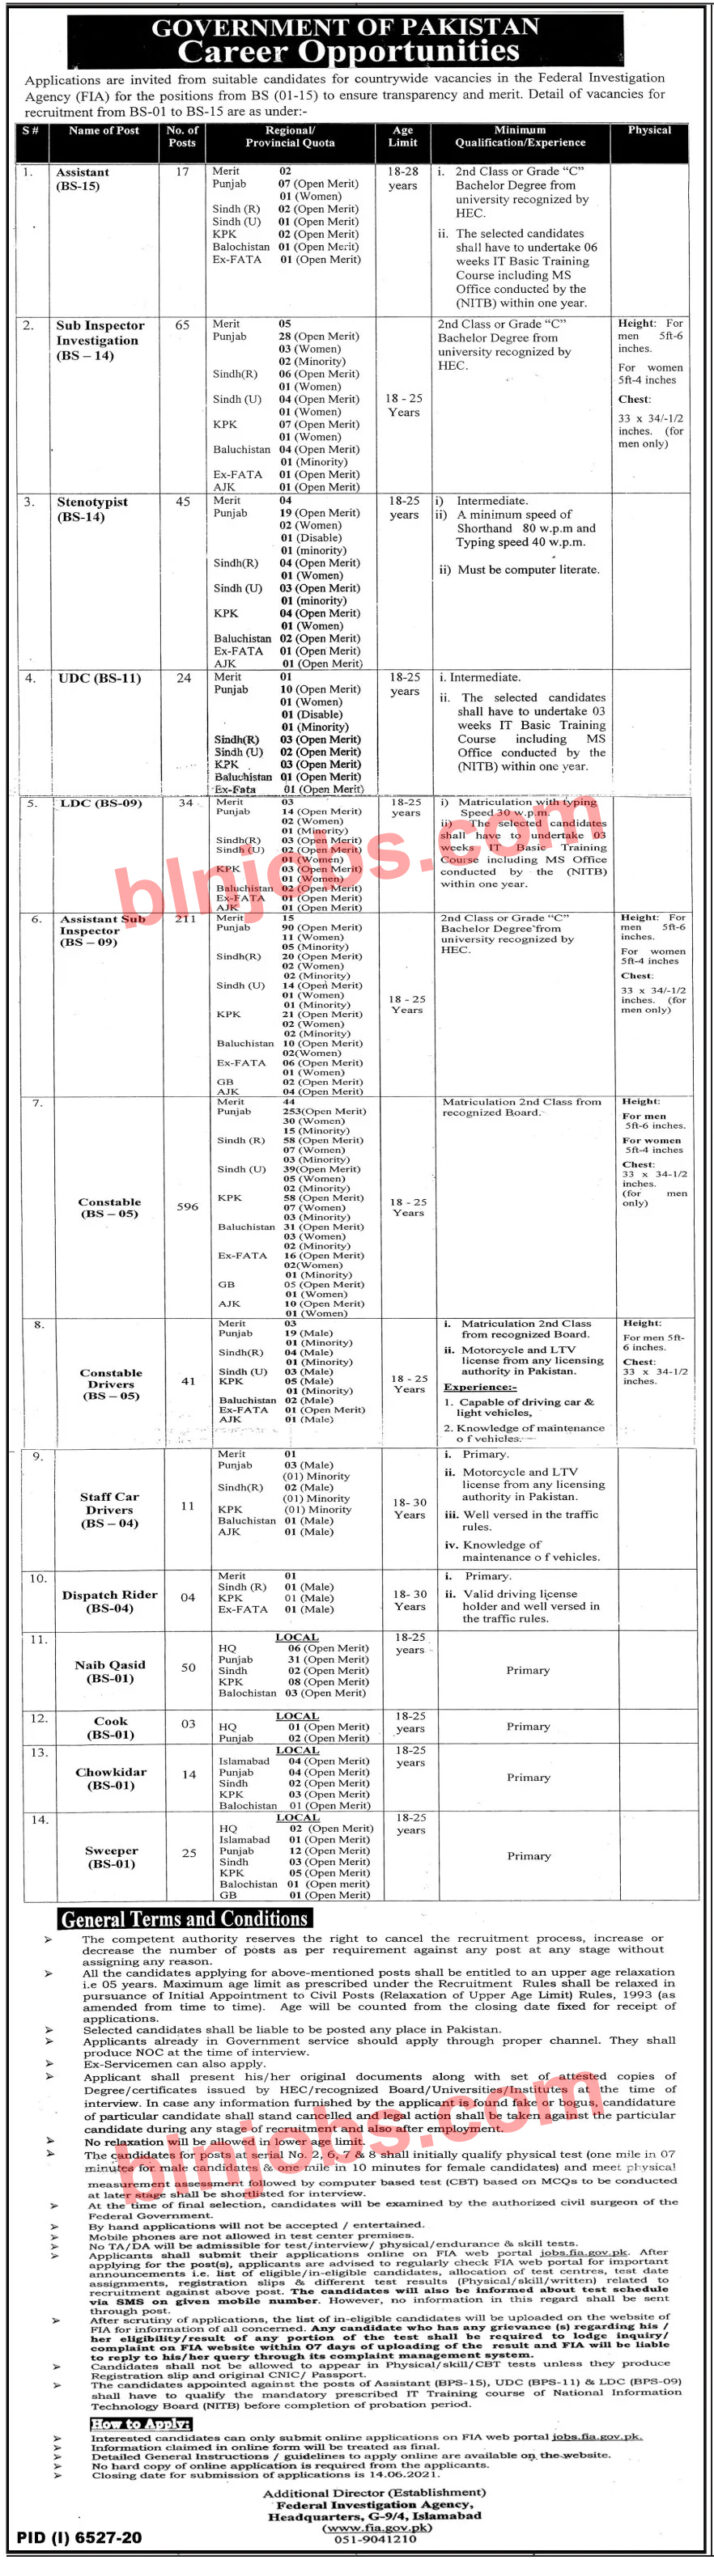 FIA Jobs 2021 - Jobs in Federal Investigation Agency FIA 2021 - Apply Online